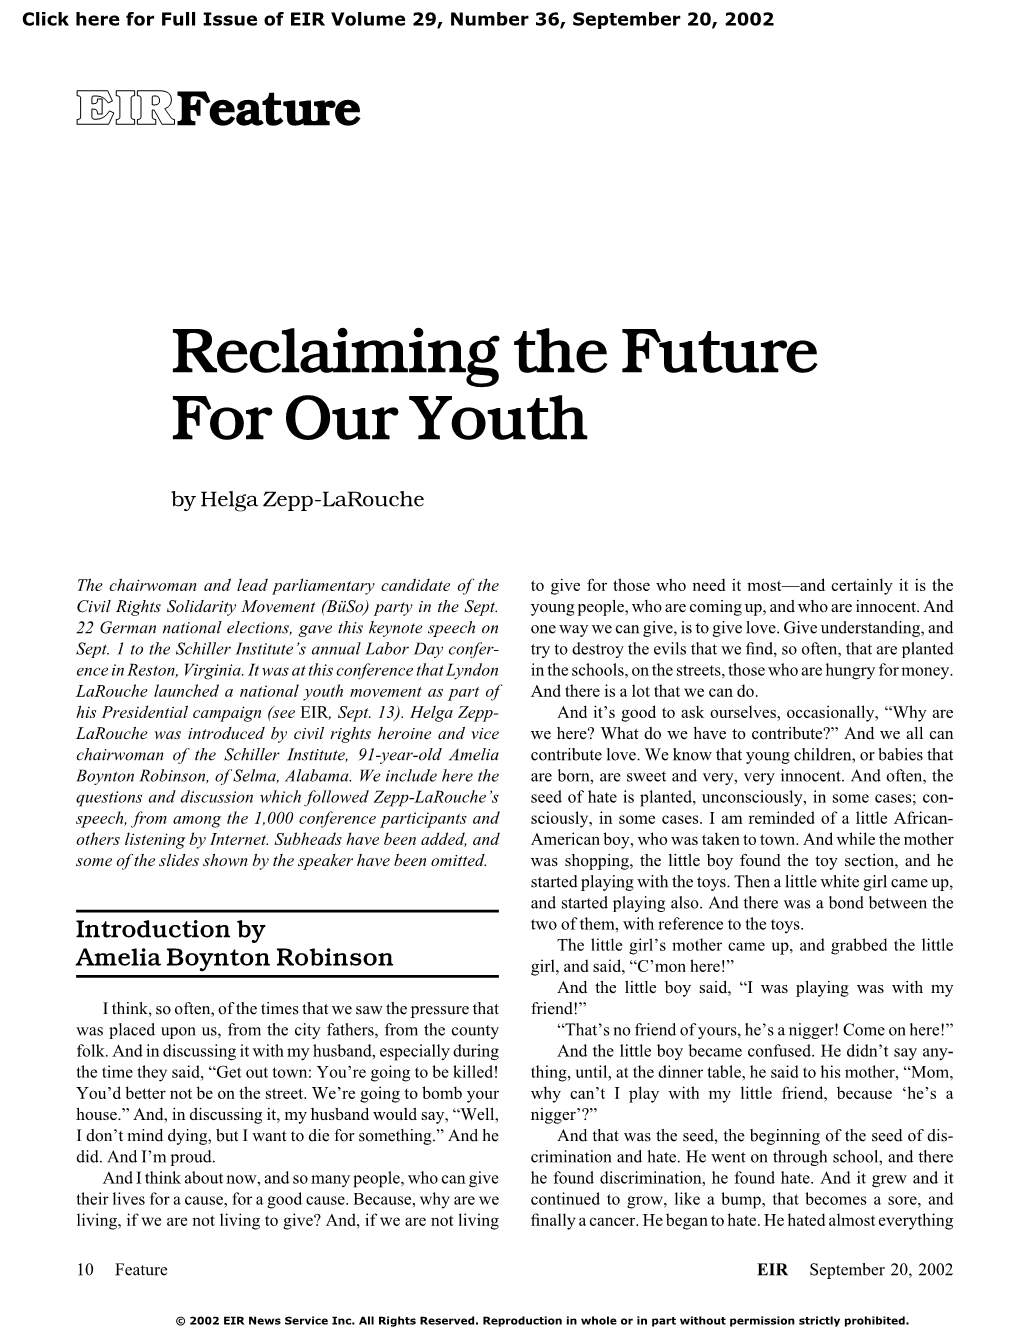 Reclaiming the Future for Our Youth